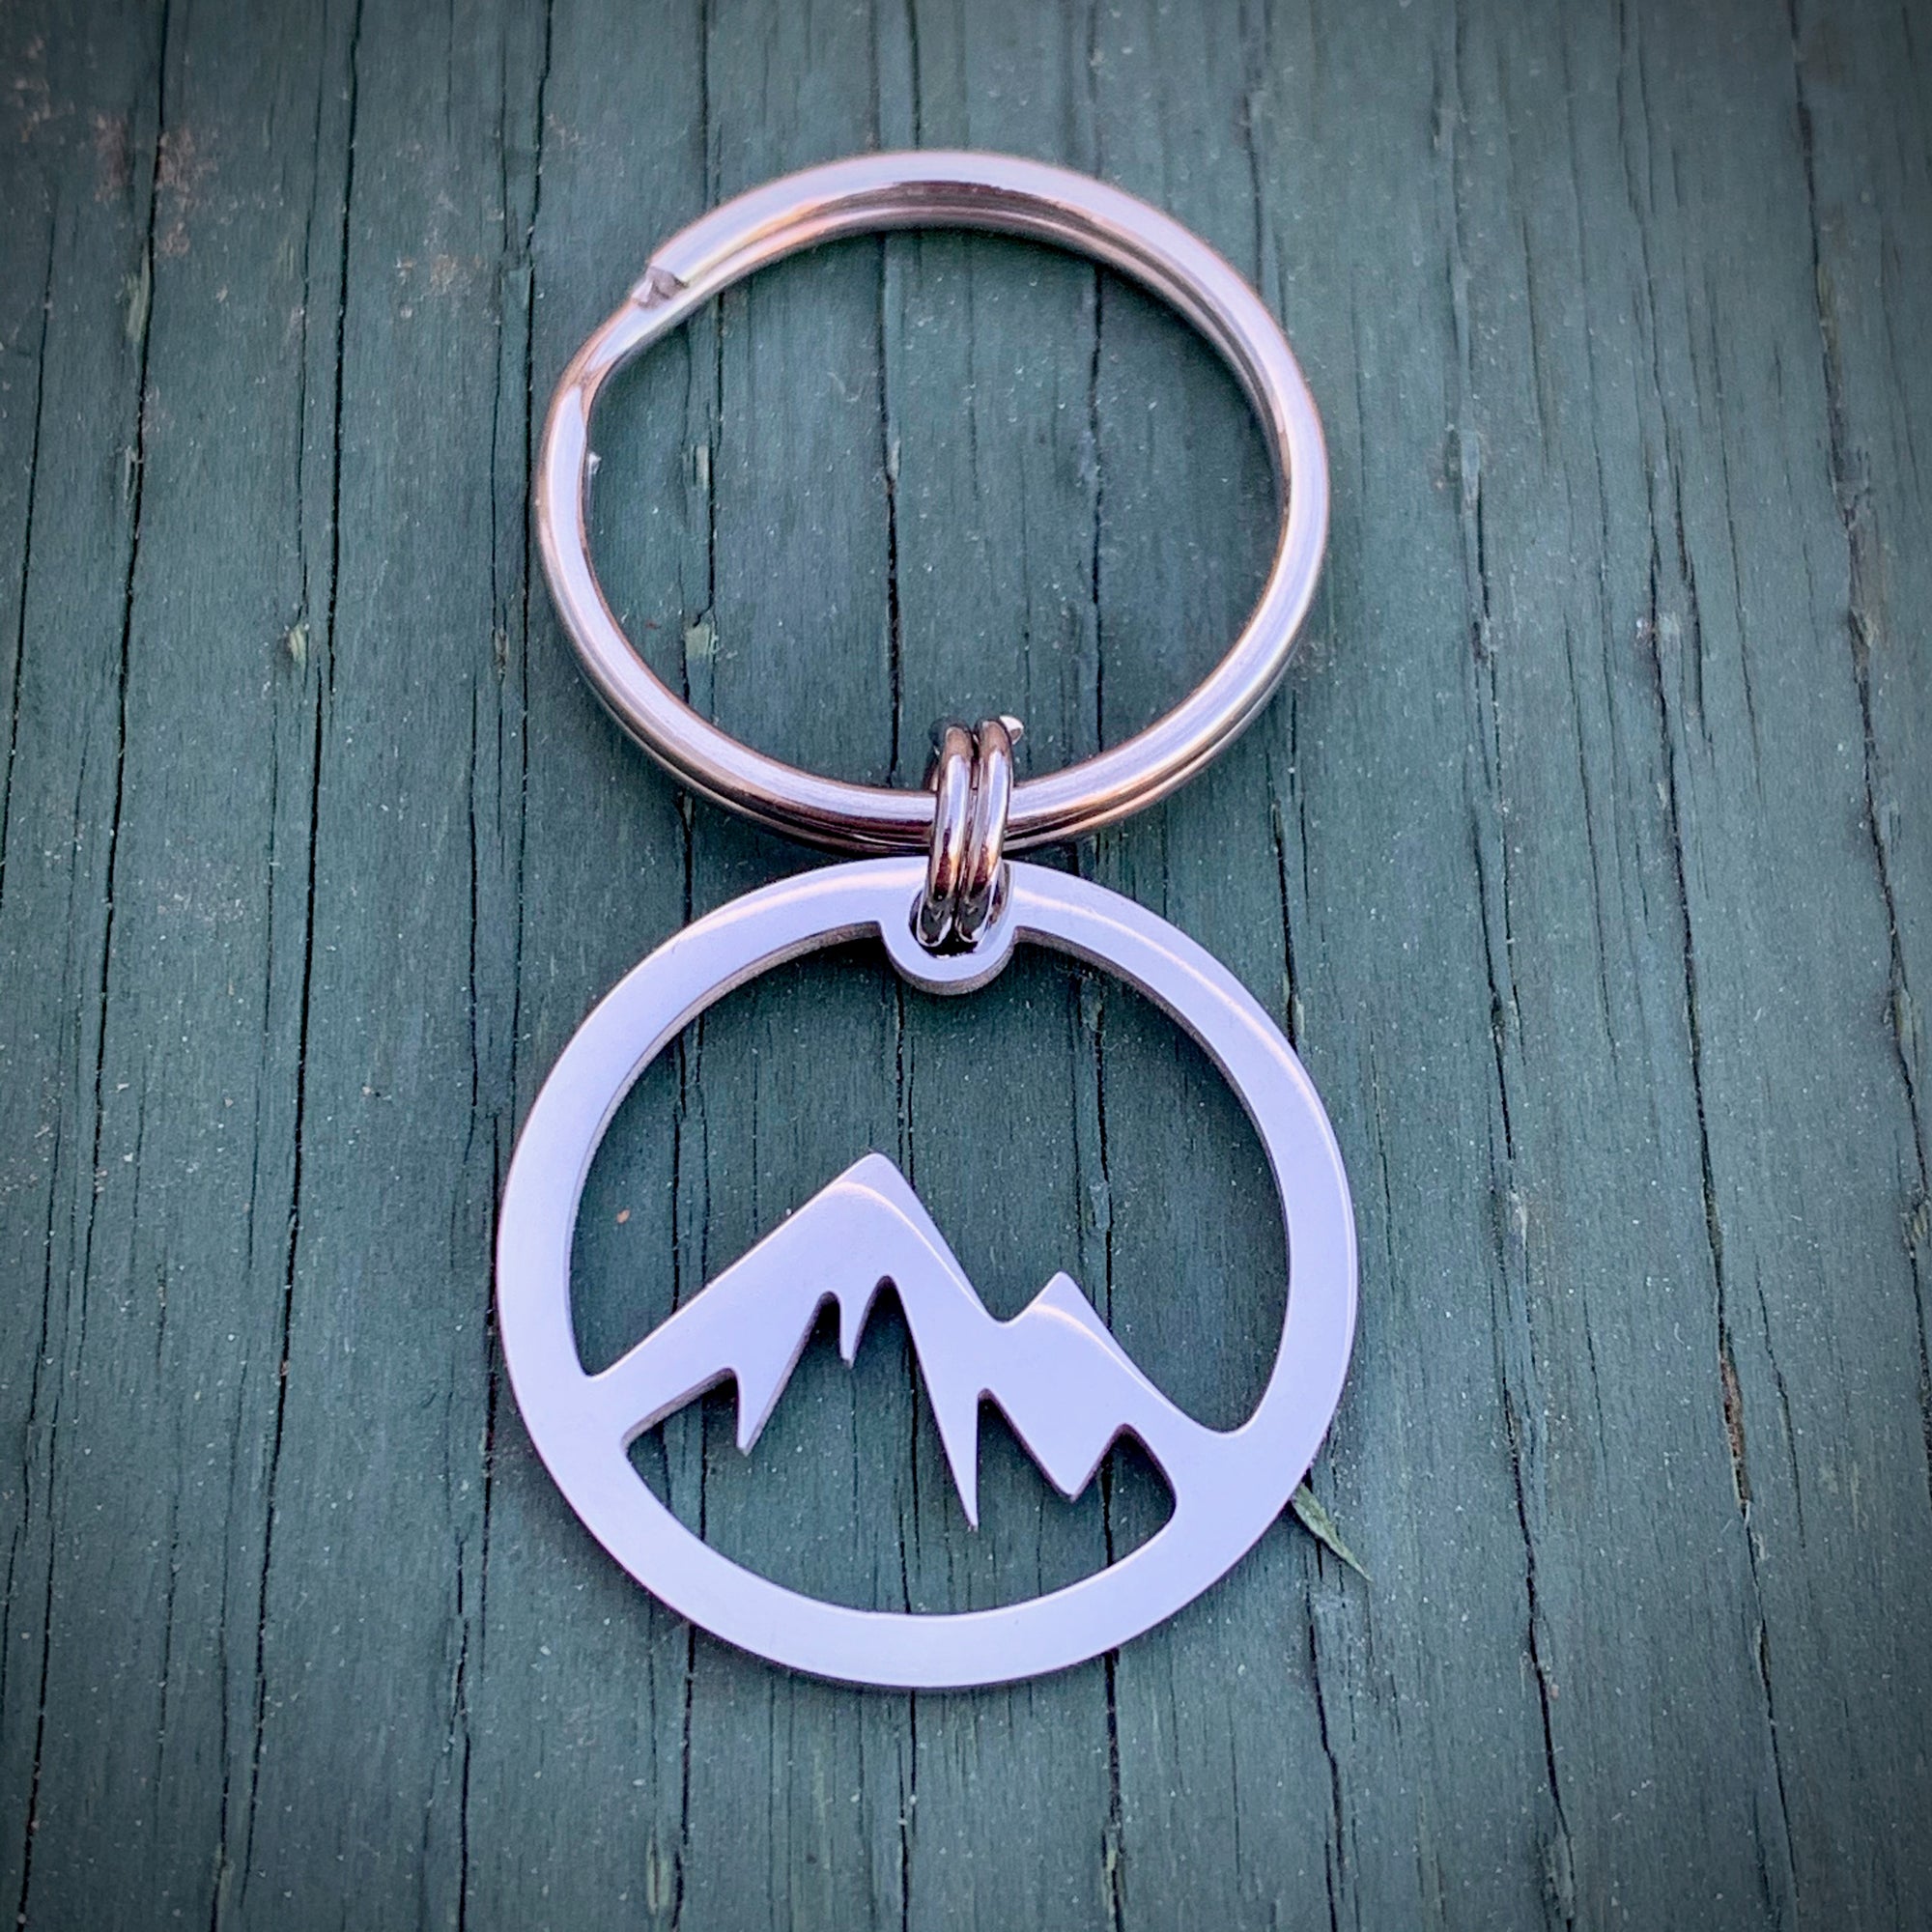 Stunning Stainless Steel Mountain Key Ring: Elevate Your Everyday Adventure